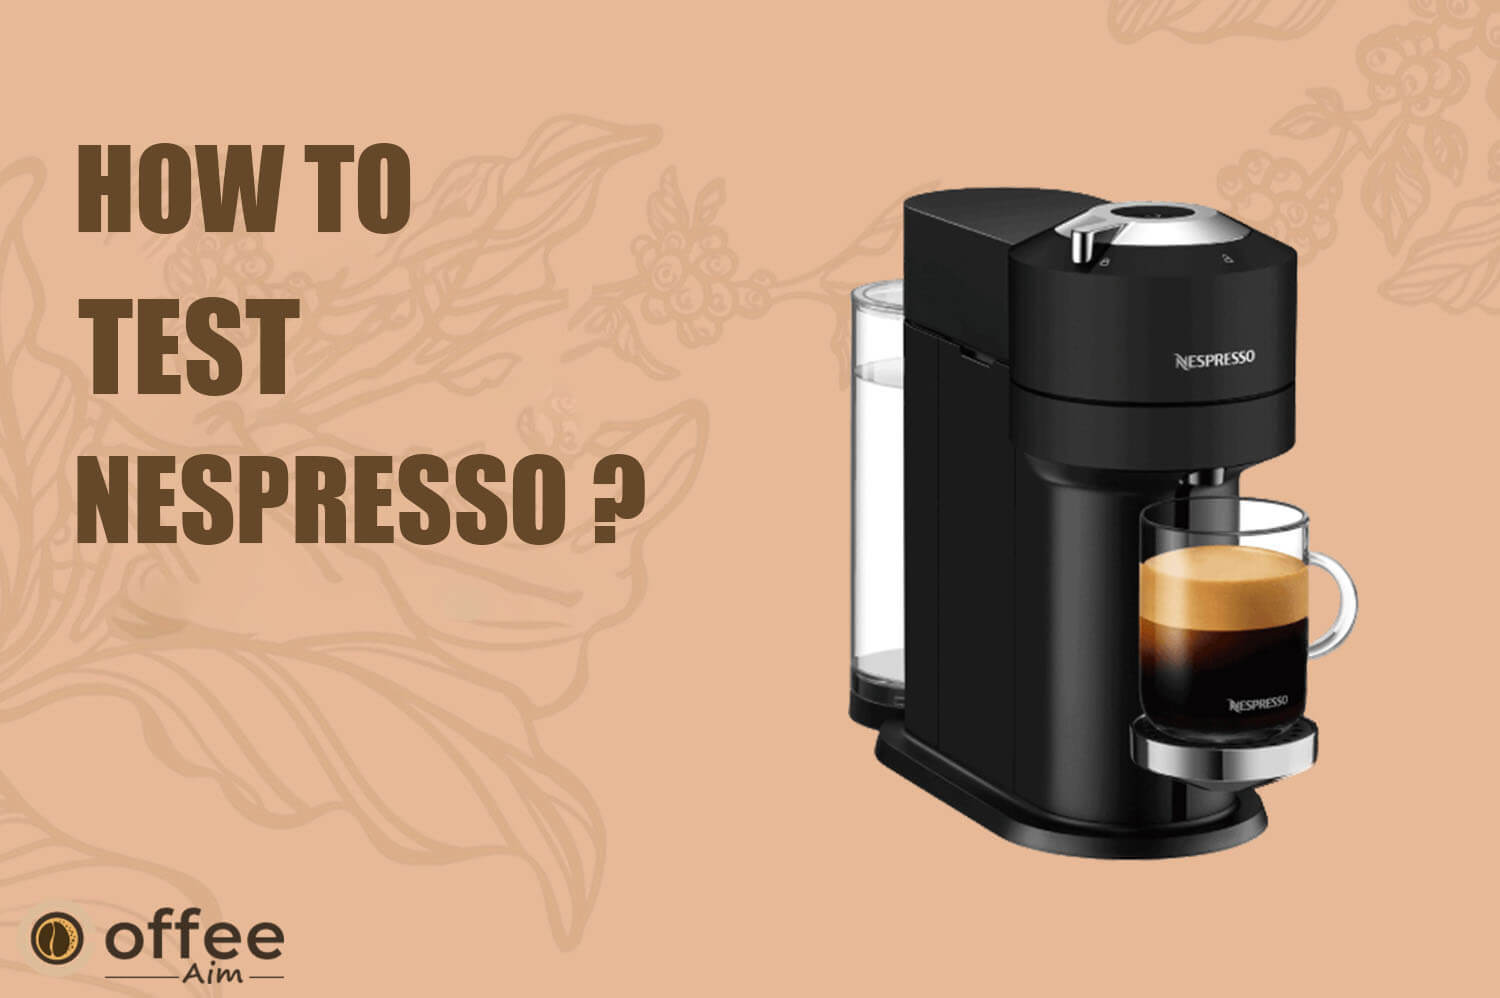 Featured image for the article "How to test Nespresso"